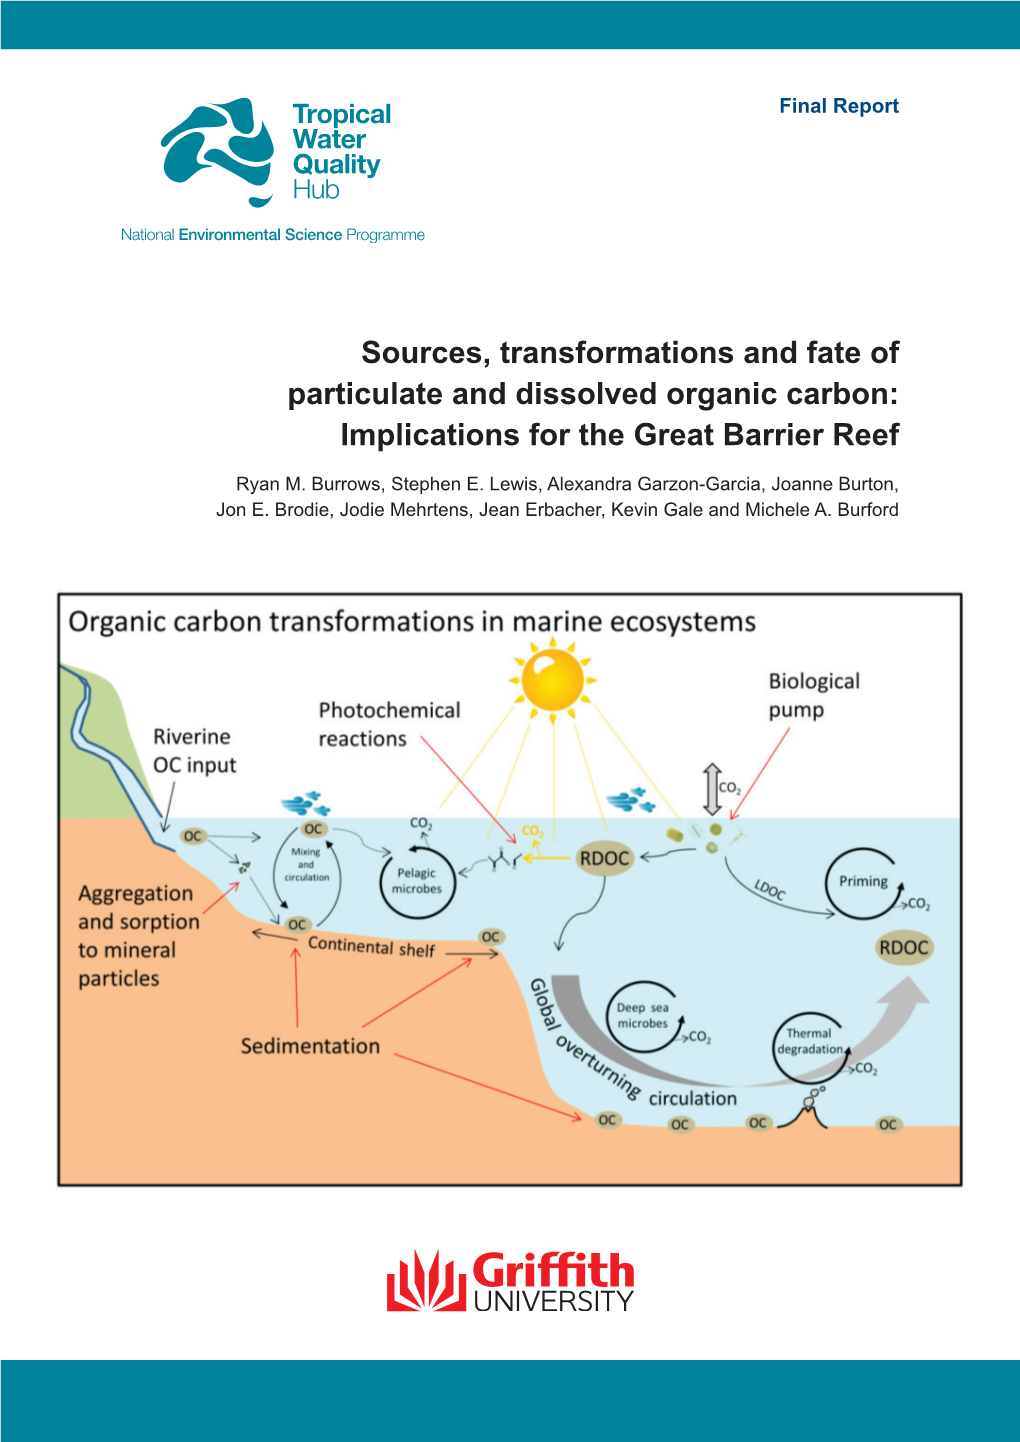 Sources, Transformations and Fate of Particulate and Dissolved Organic Carbon: Implications for the Great Barrier Reef